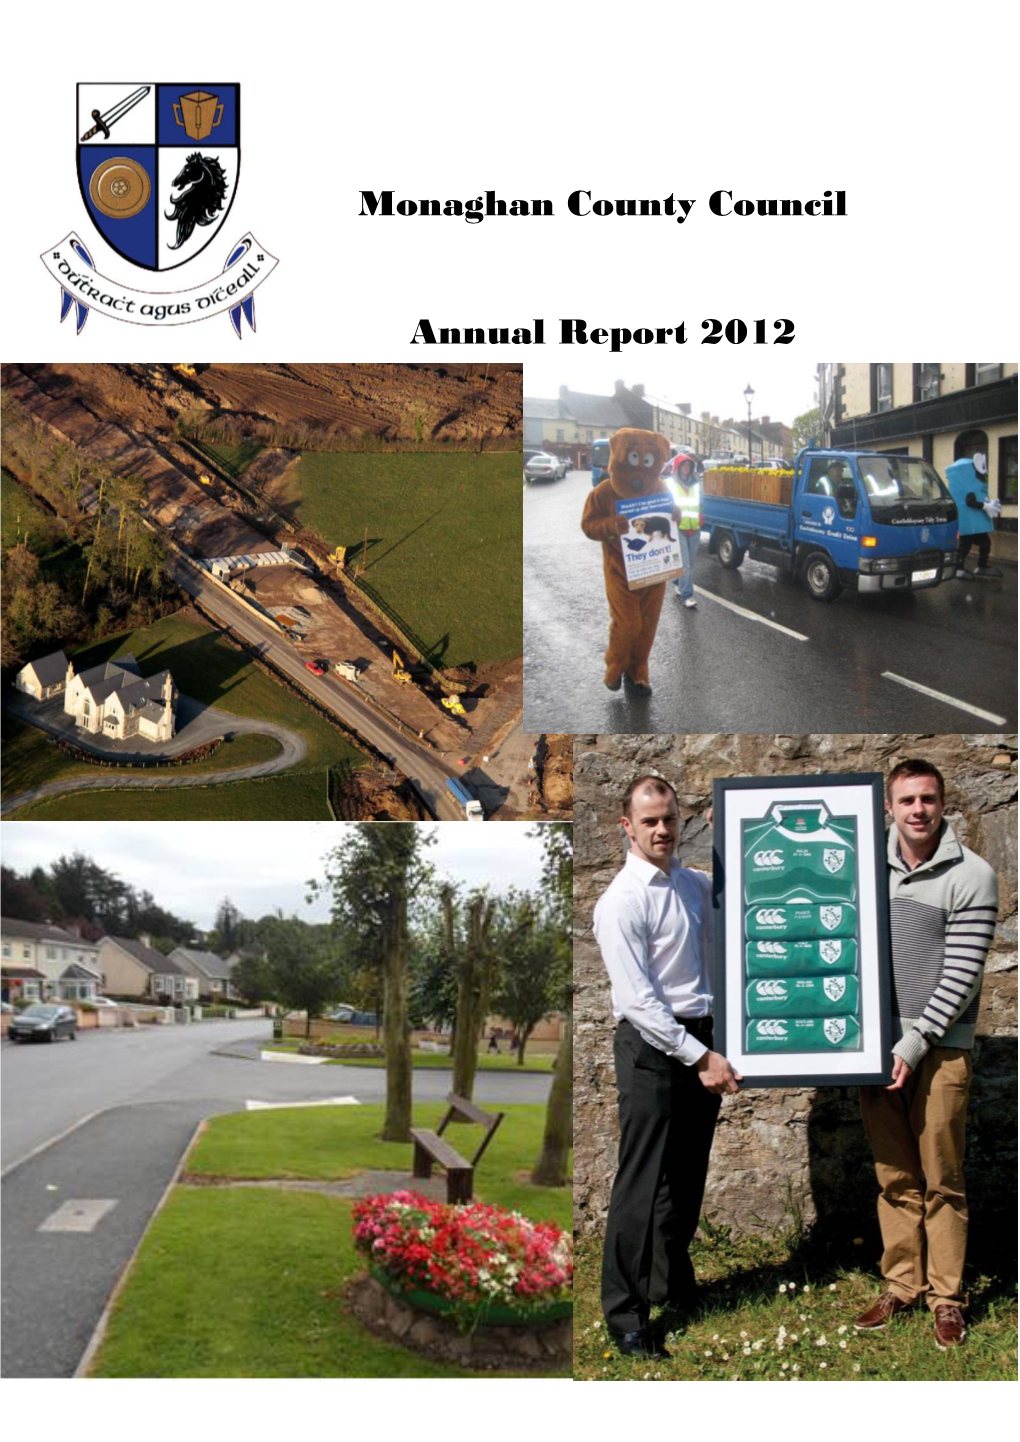 Monaghan County Council Annual Report 2012